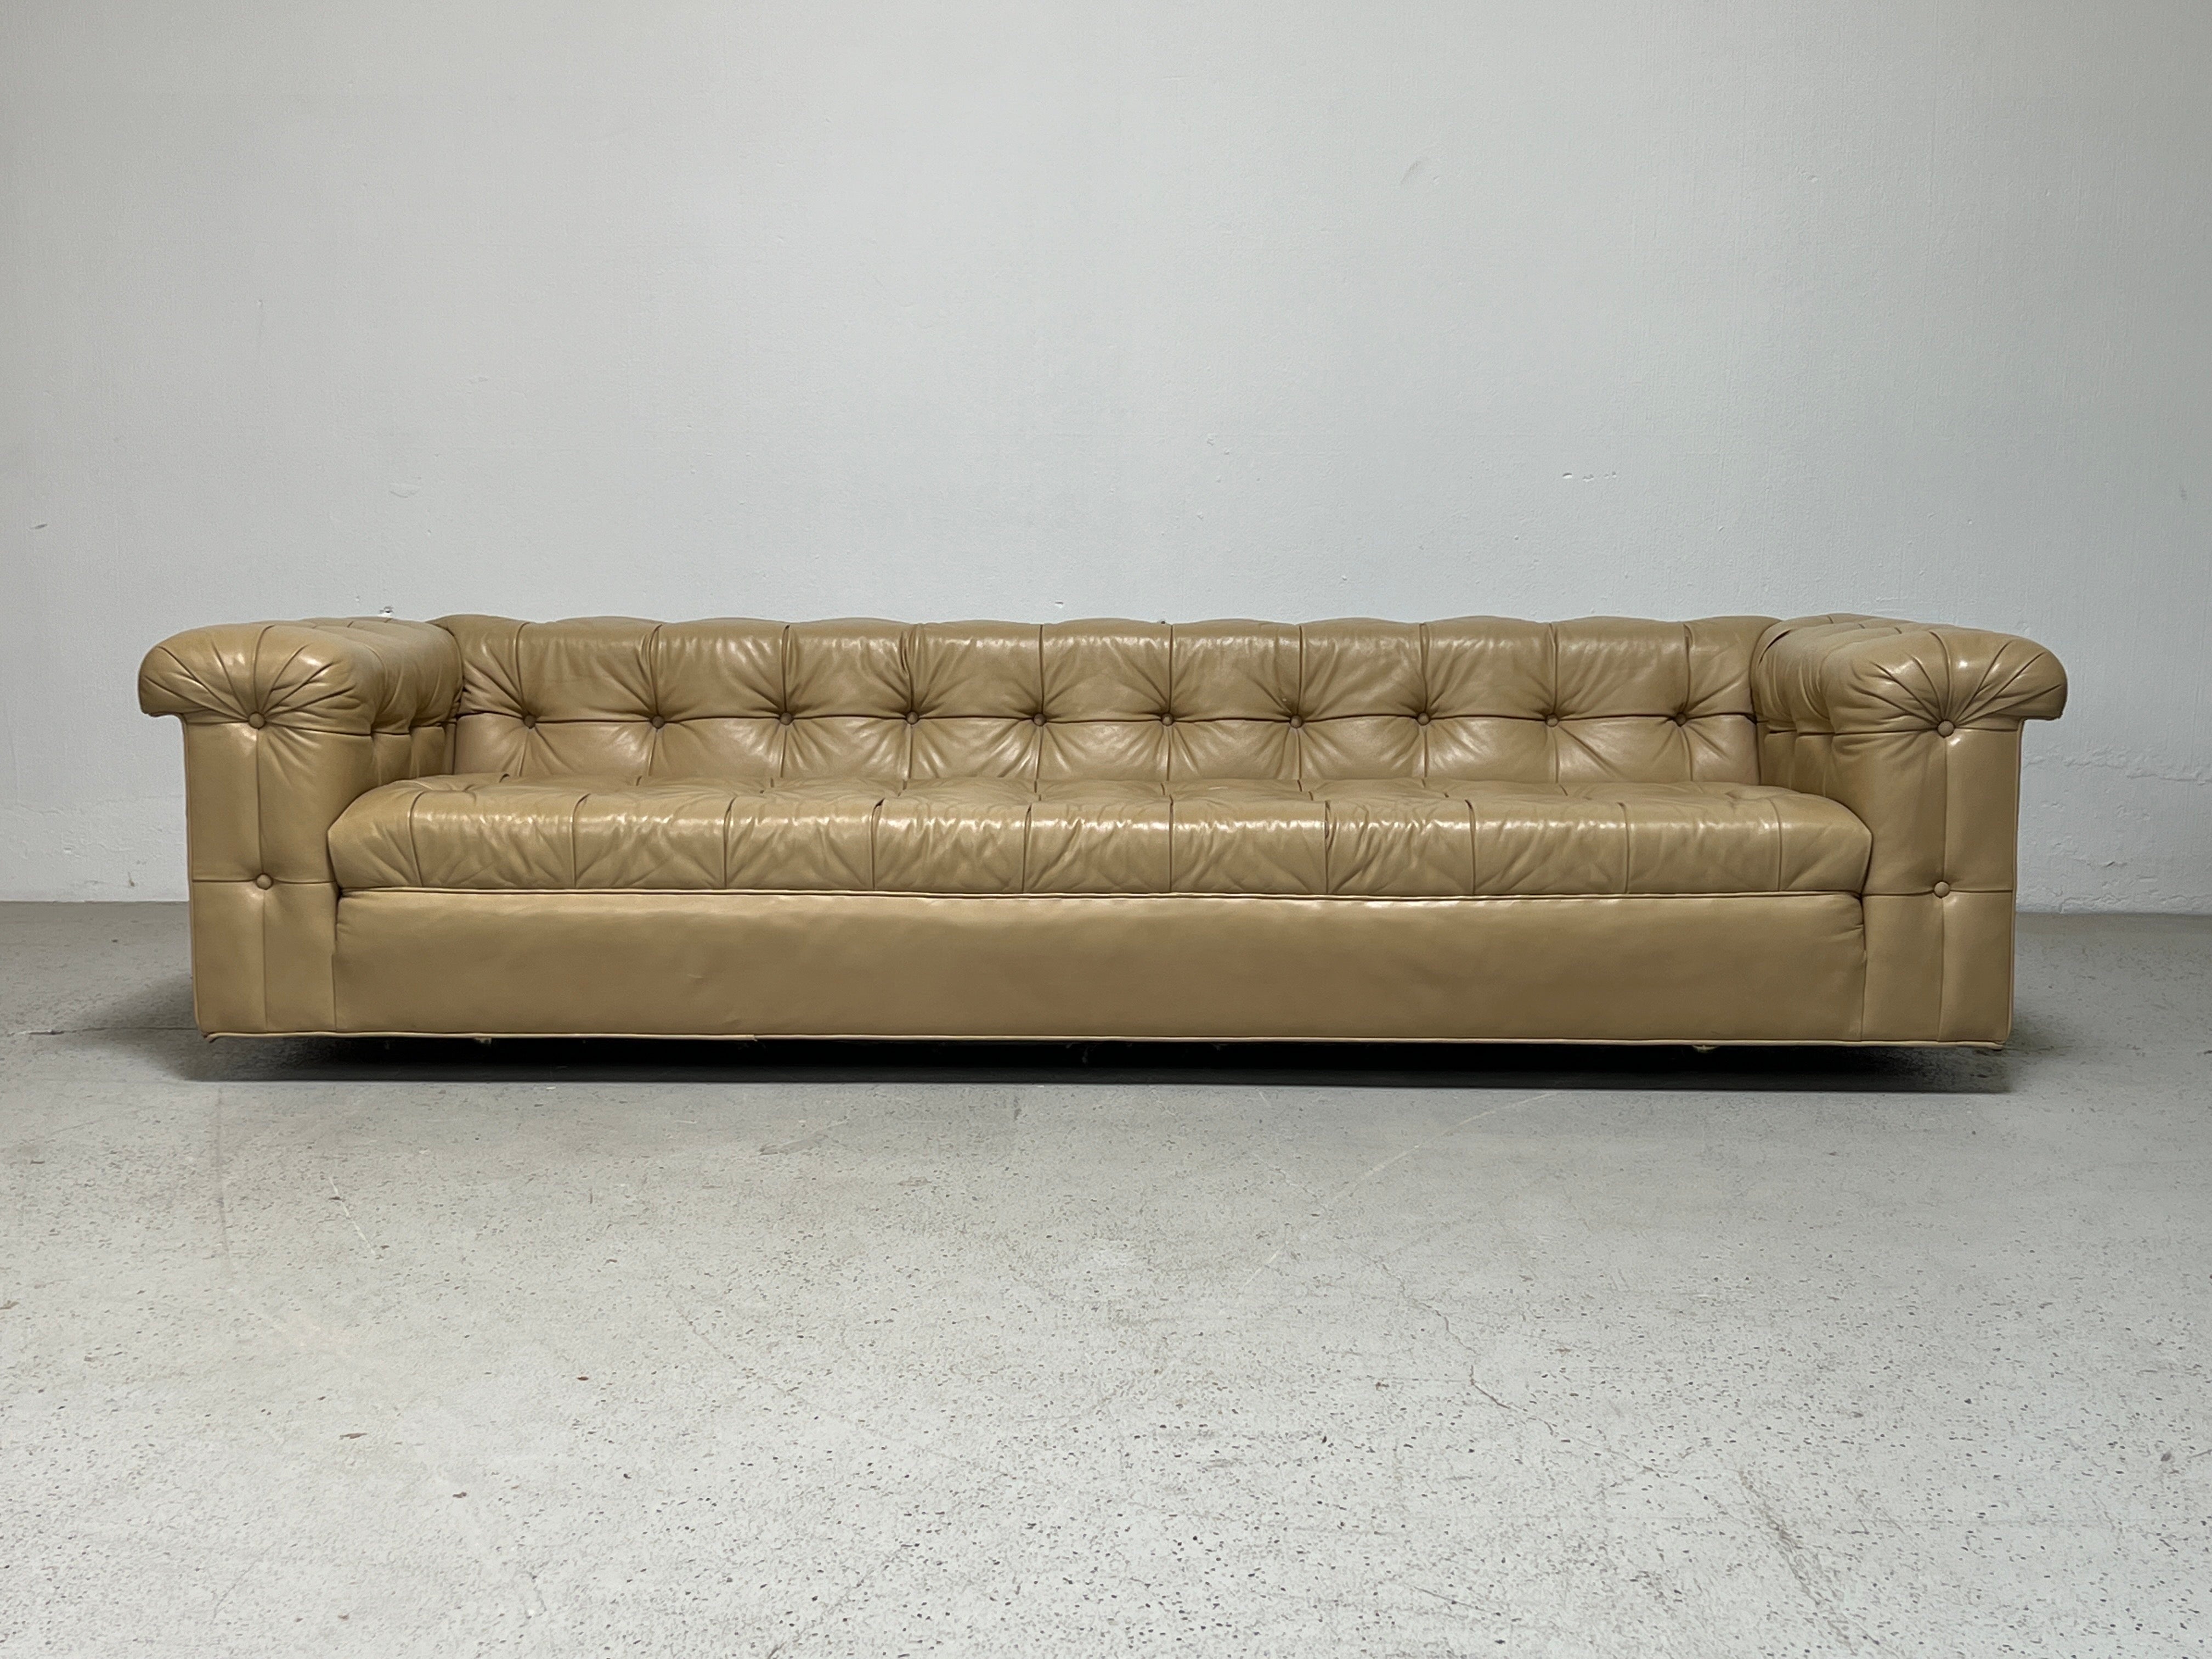 A beautiful pair of party sofas designed by Edward Wormley for Dunbar in original buttery soft light tan leather.